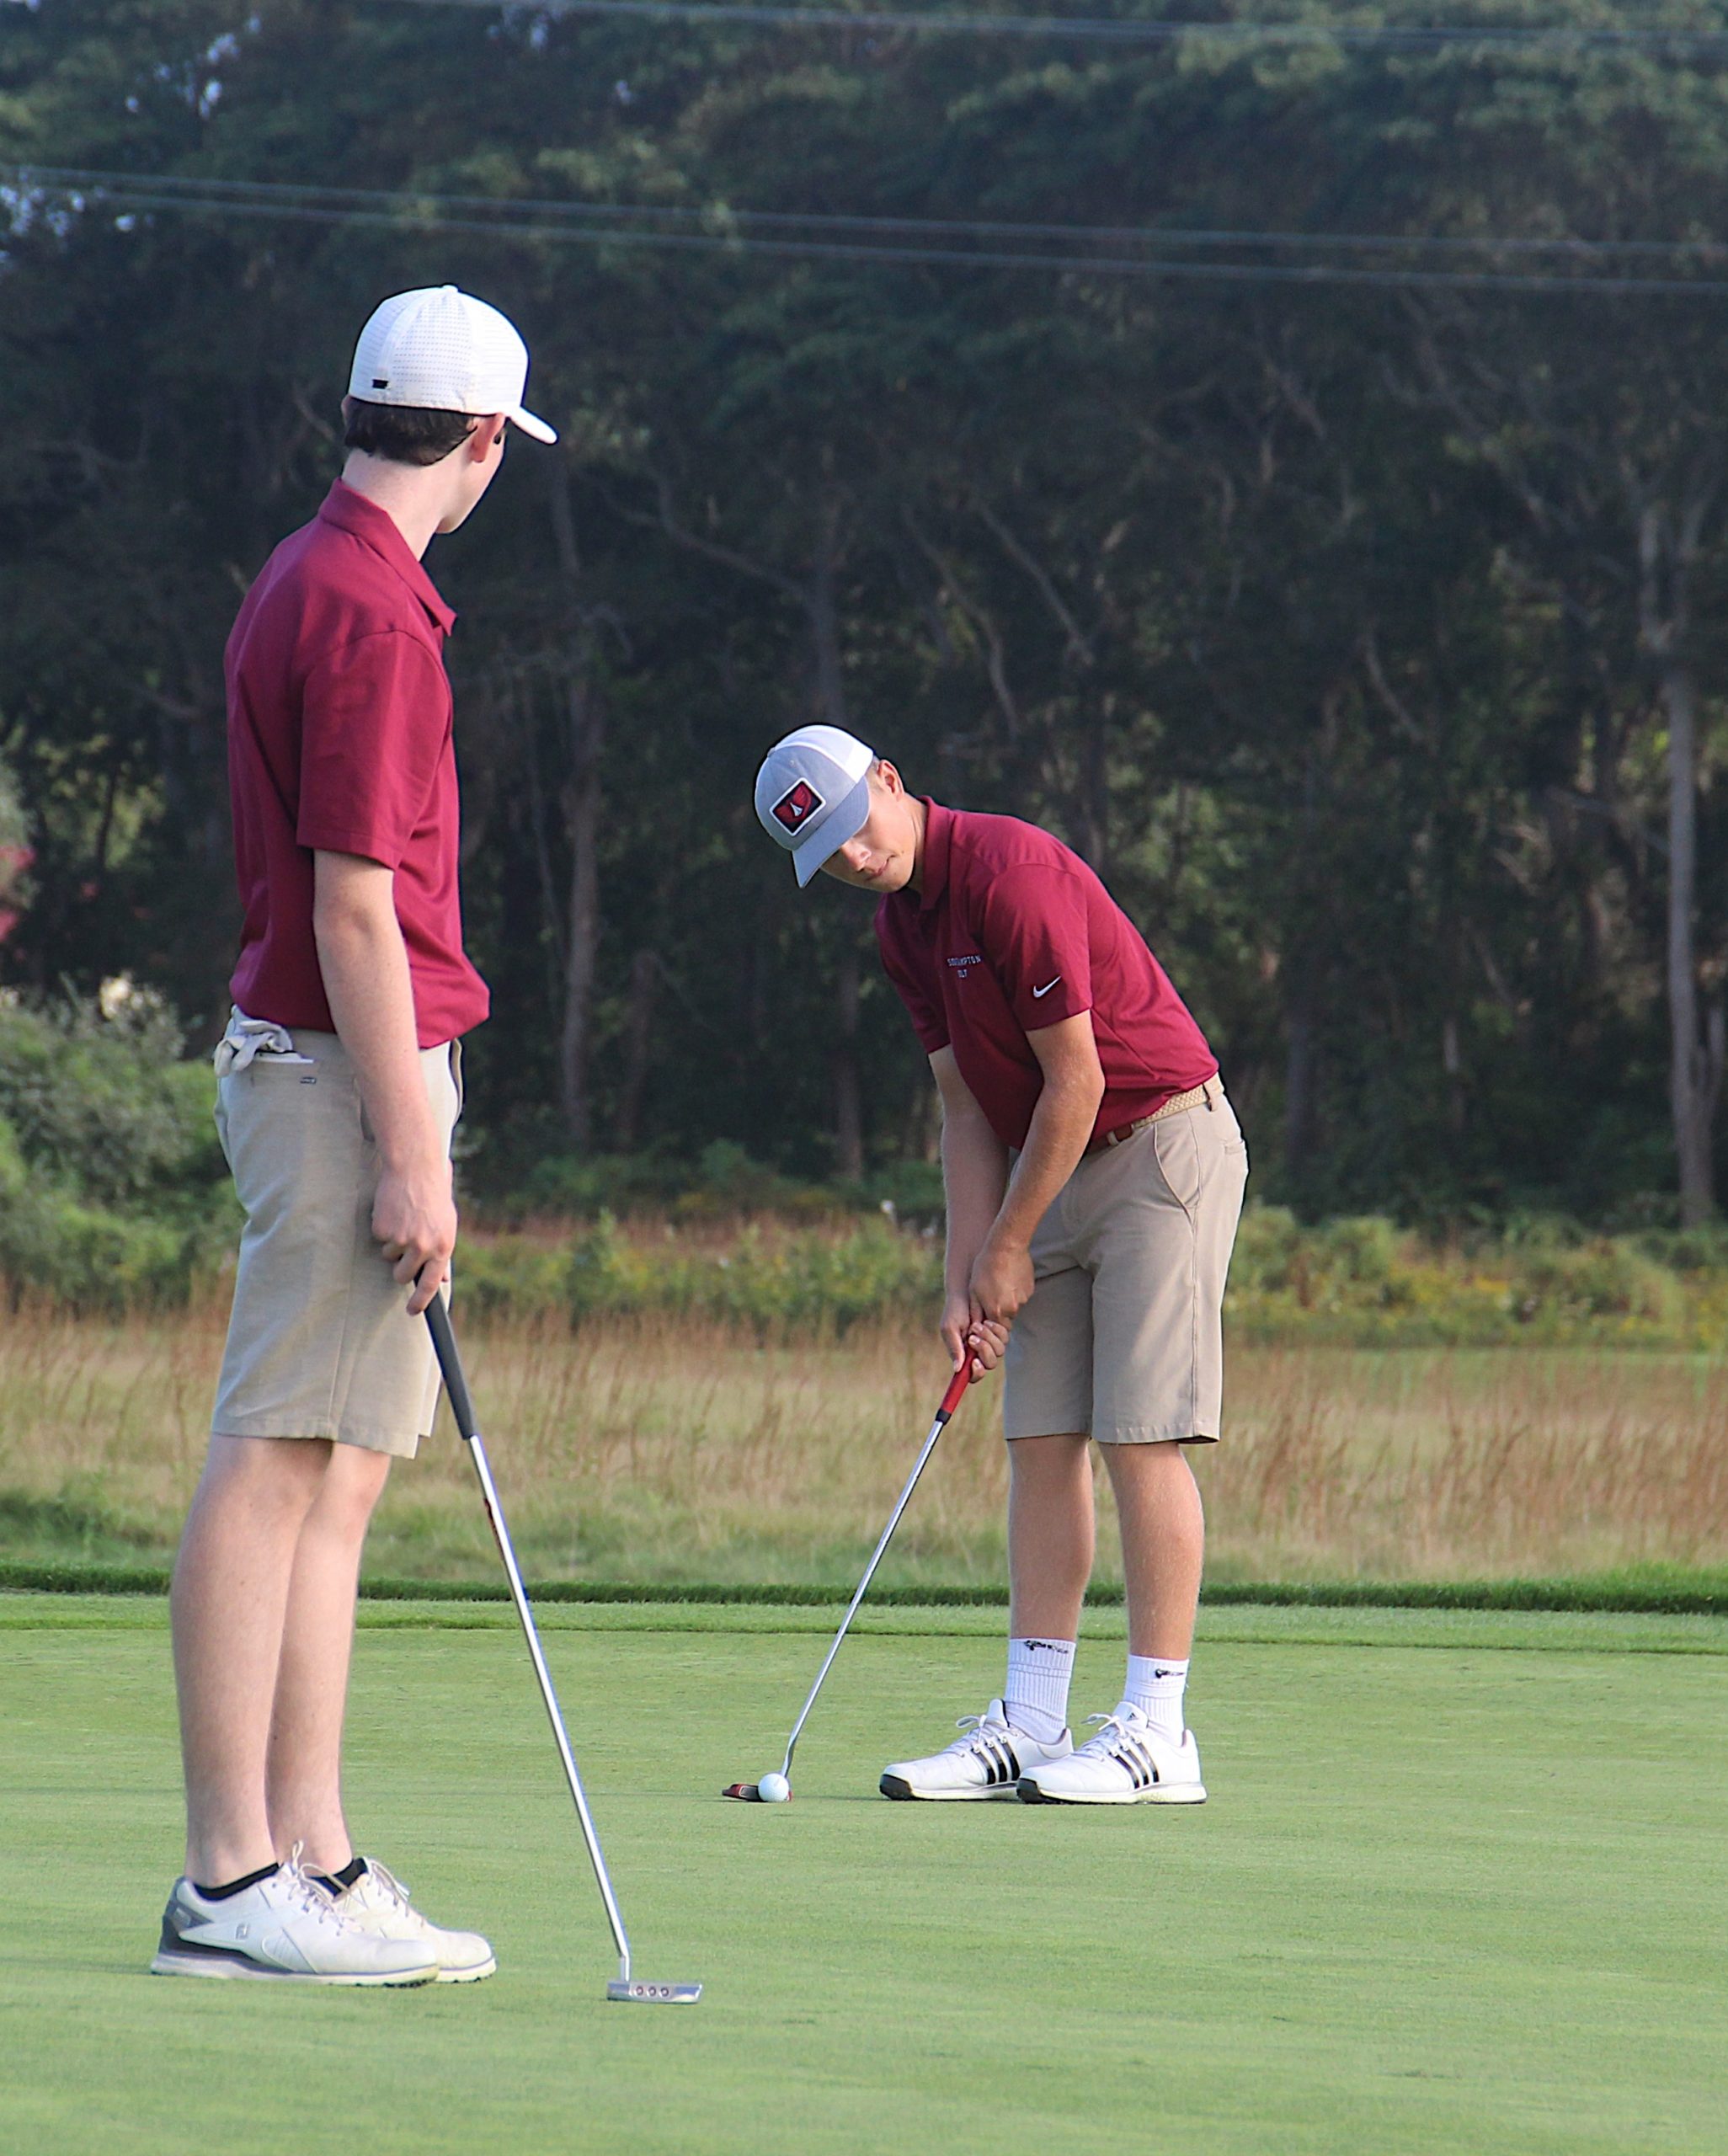 Southampton's Brian Emmons gets set to putt with teammate Liam Blackmore looking on.